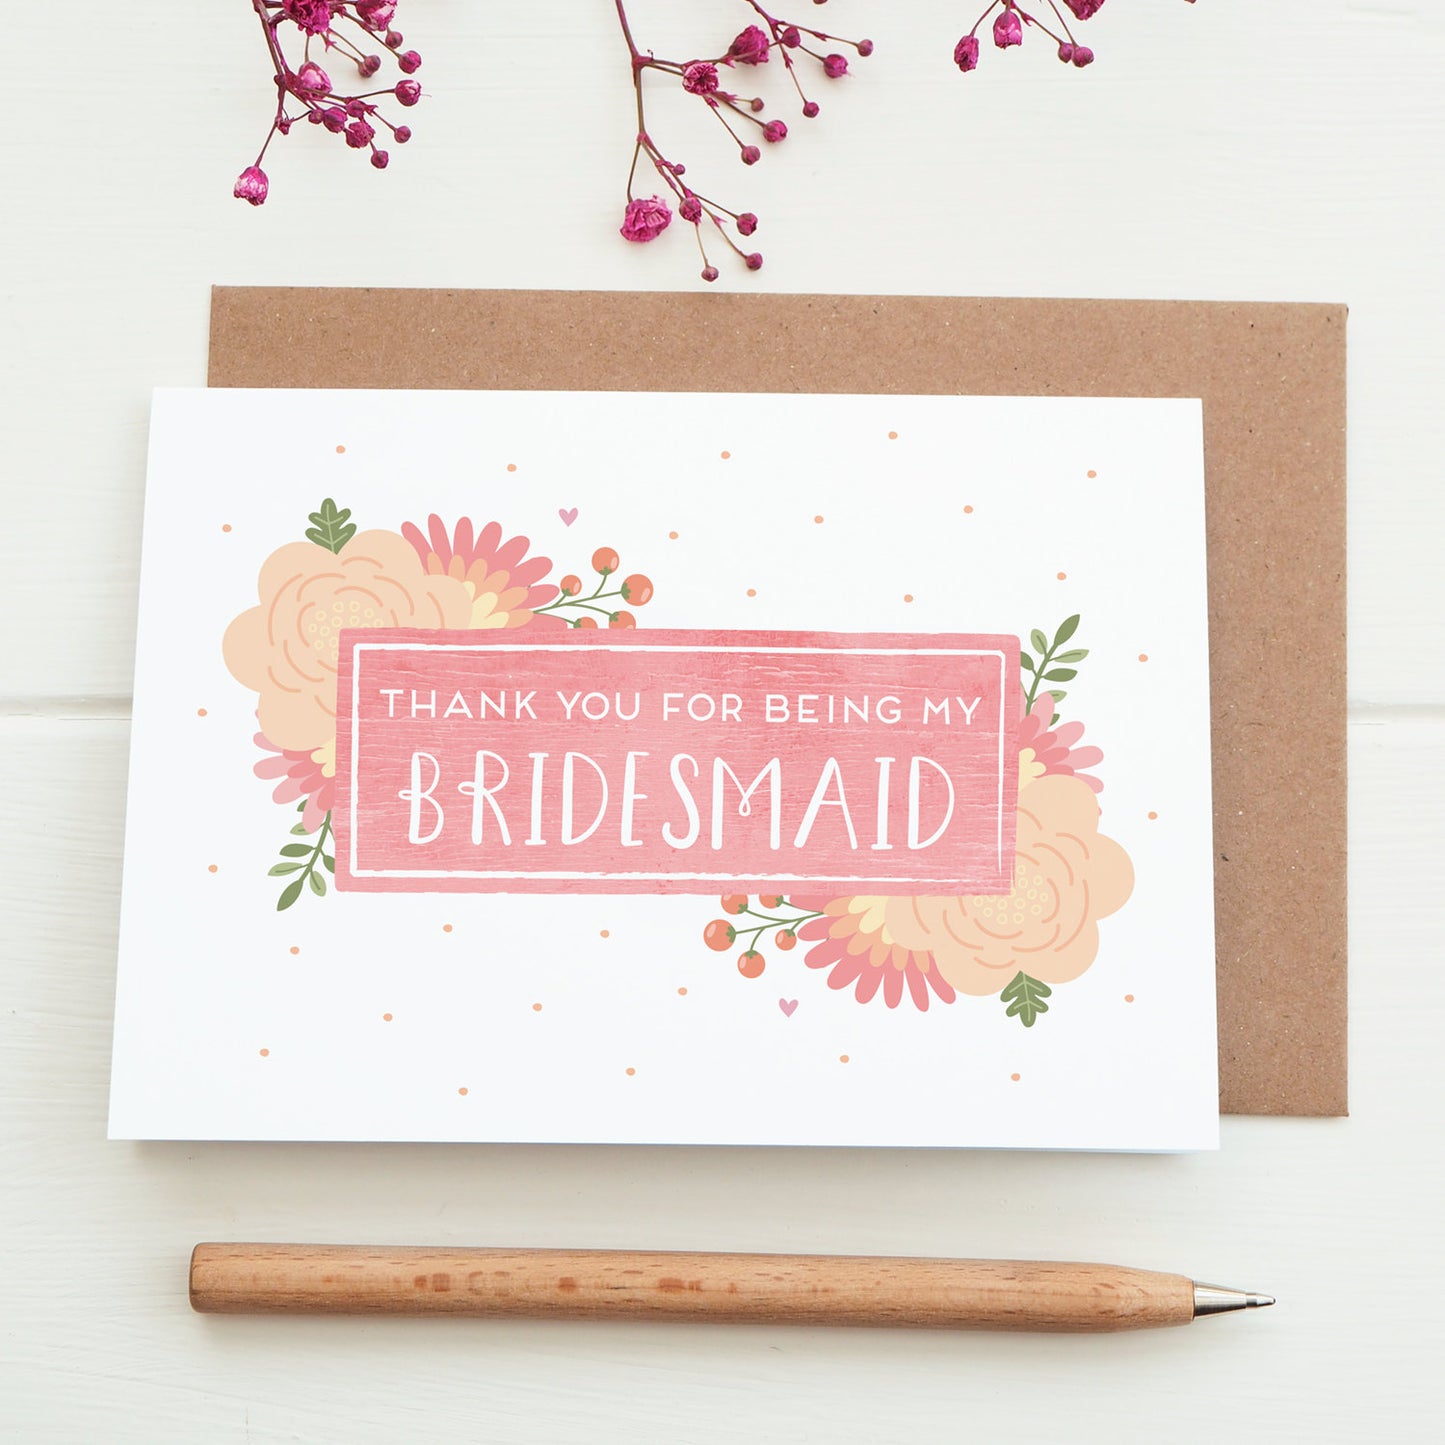 Thank you for being my Bridesmaid card in pink